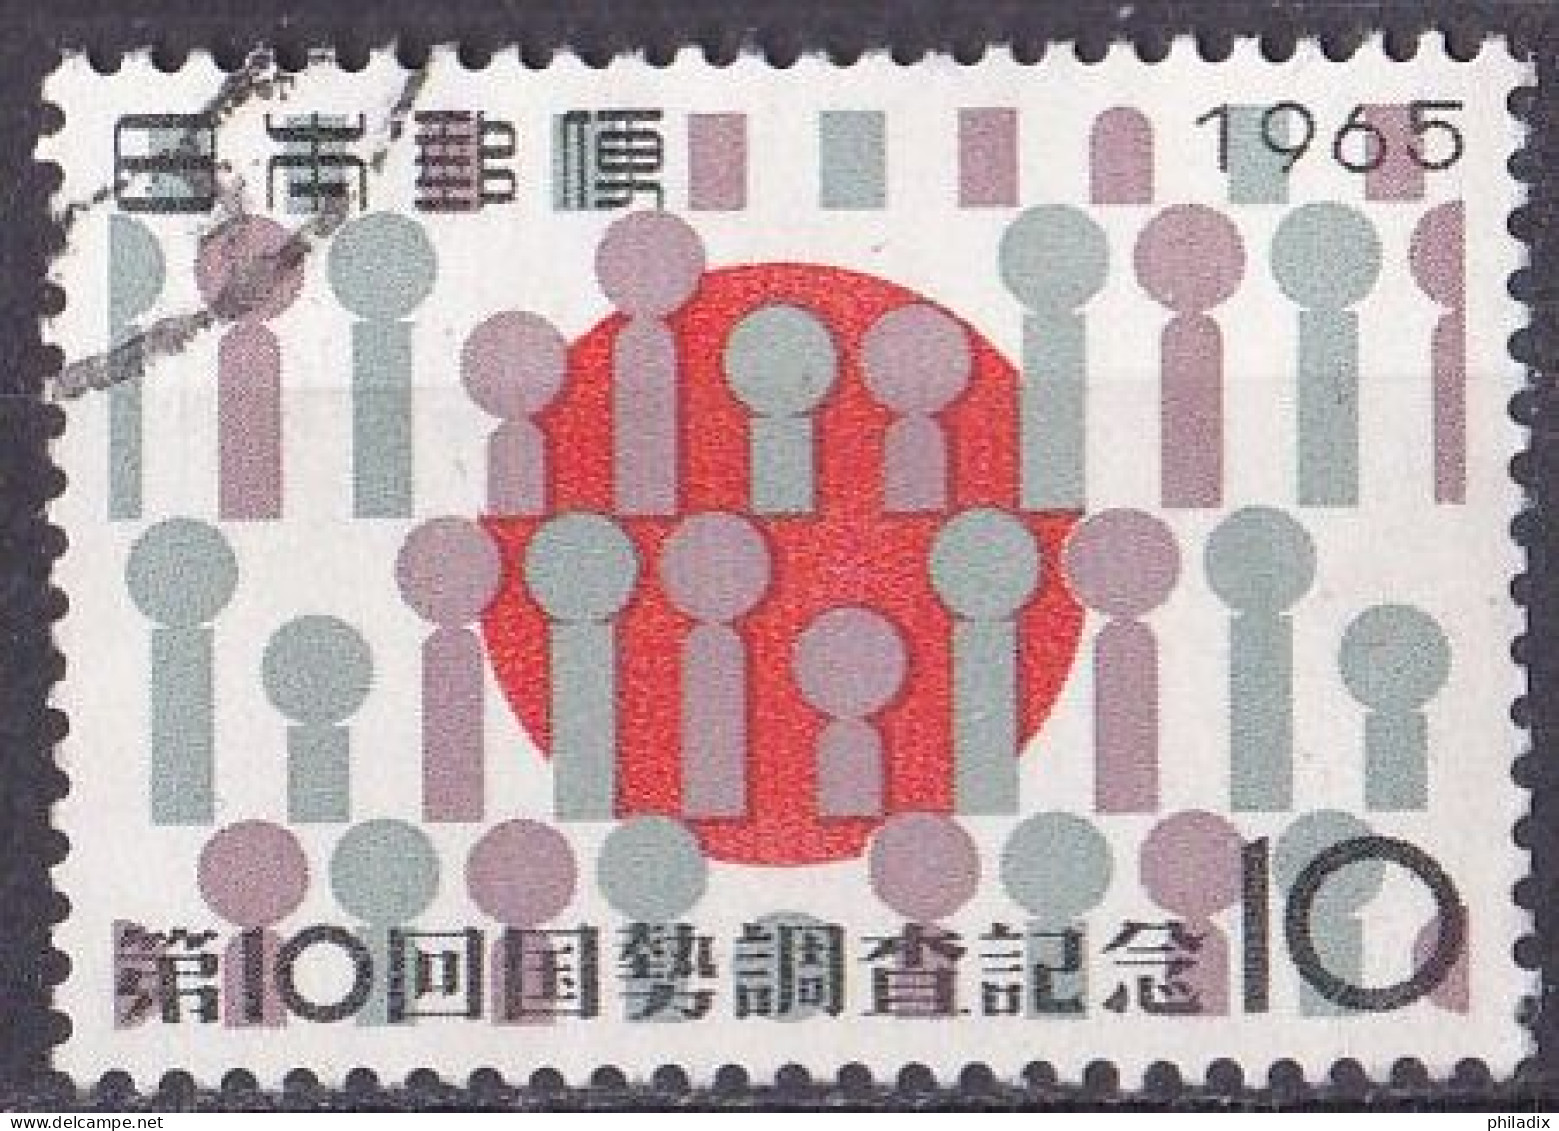 Japan Marke Von 1965 O/used (A4-4) - Used Stamps